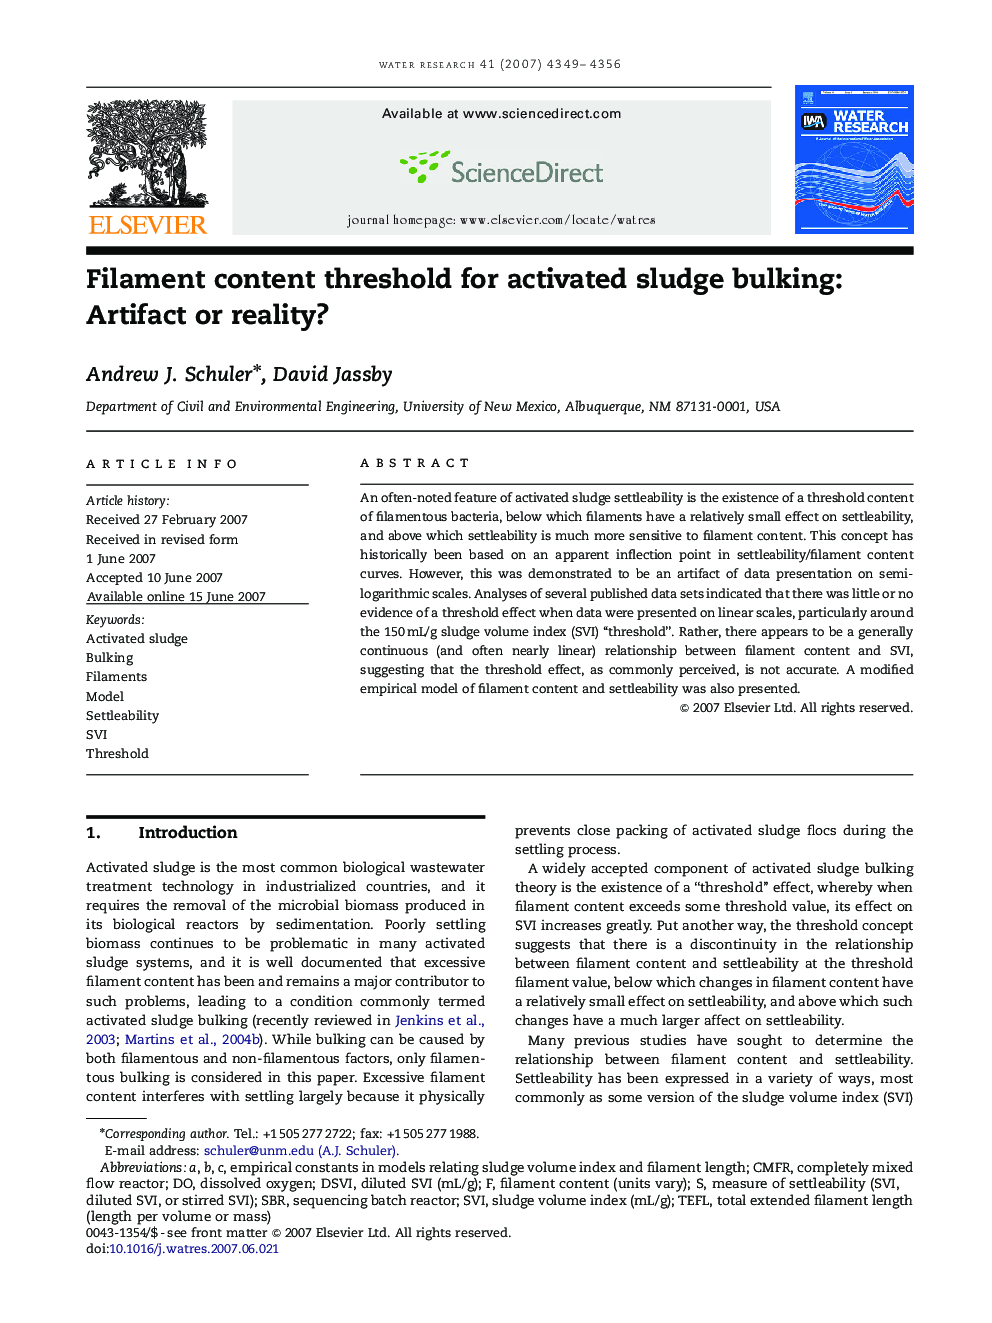 Filament content threshold for activated sludge bulking: Artifact or reality?